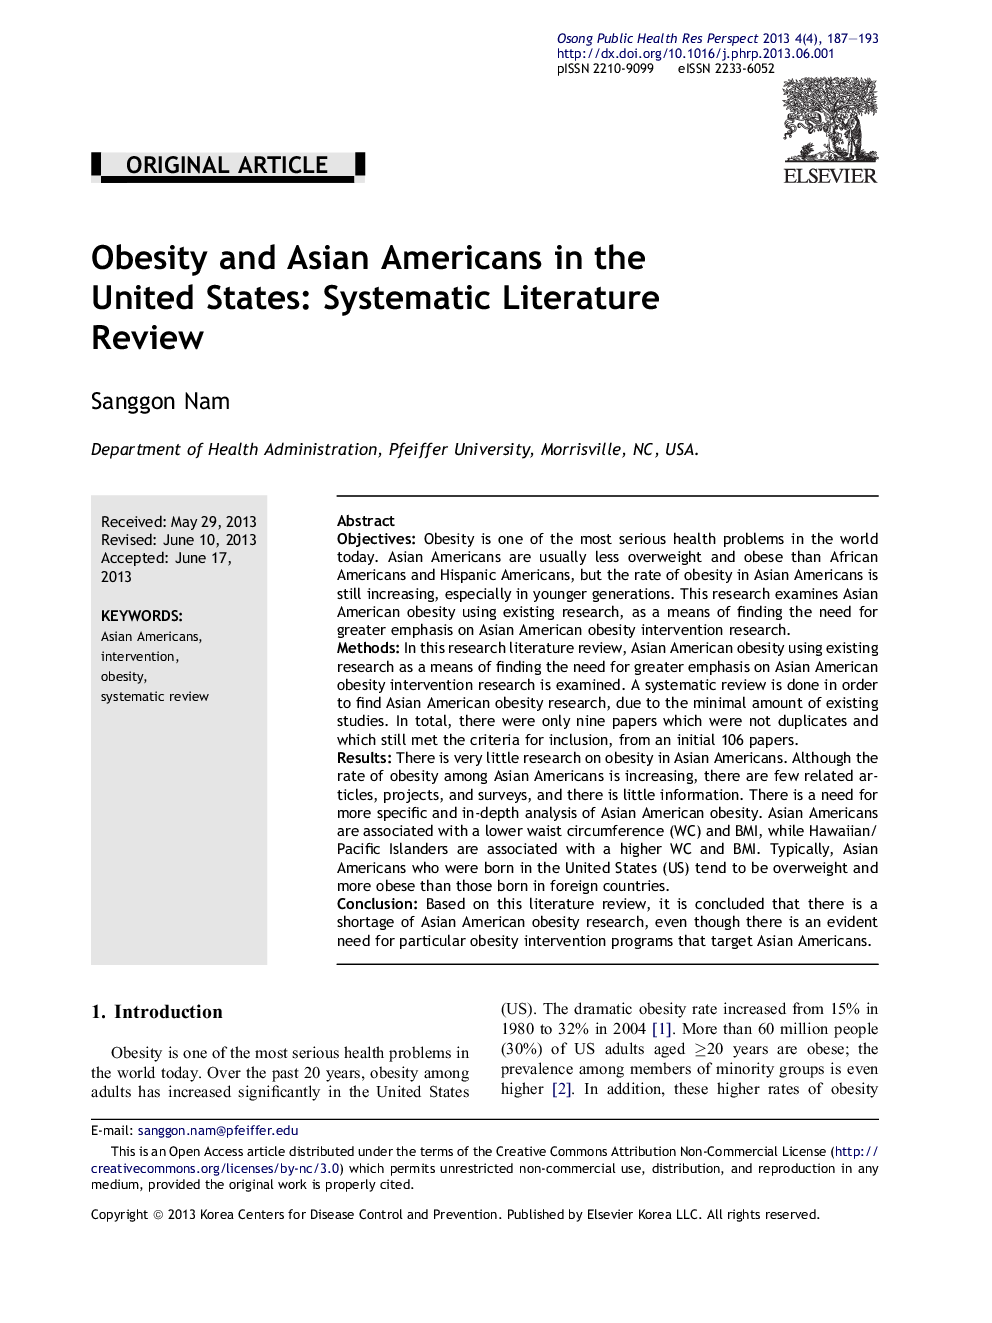 Obesity and Asian Americans in the United States: Systematic Literature Review 